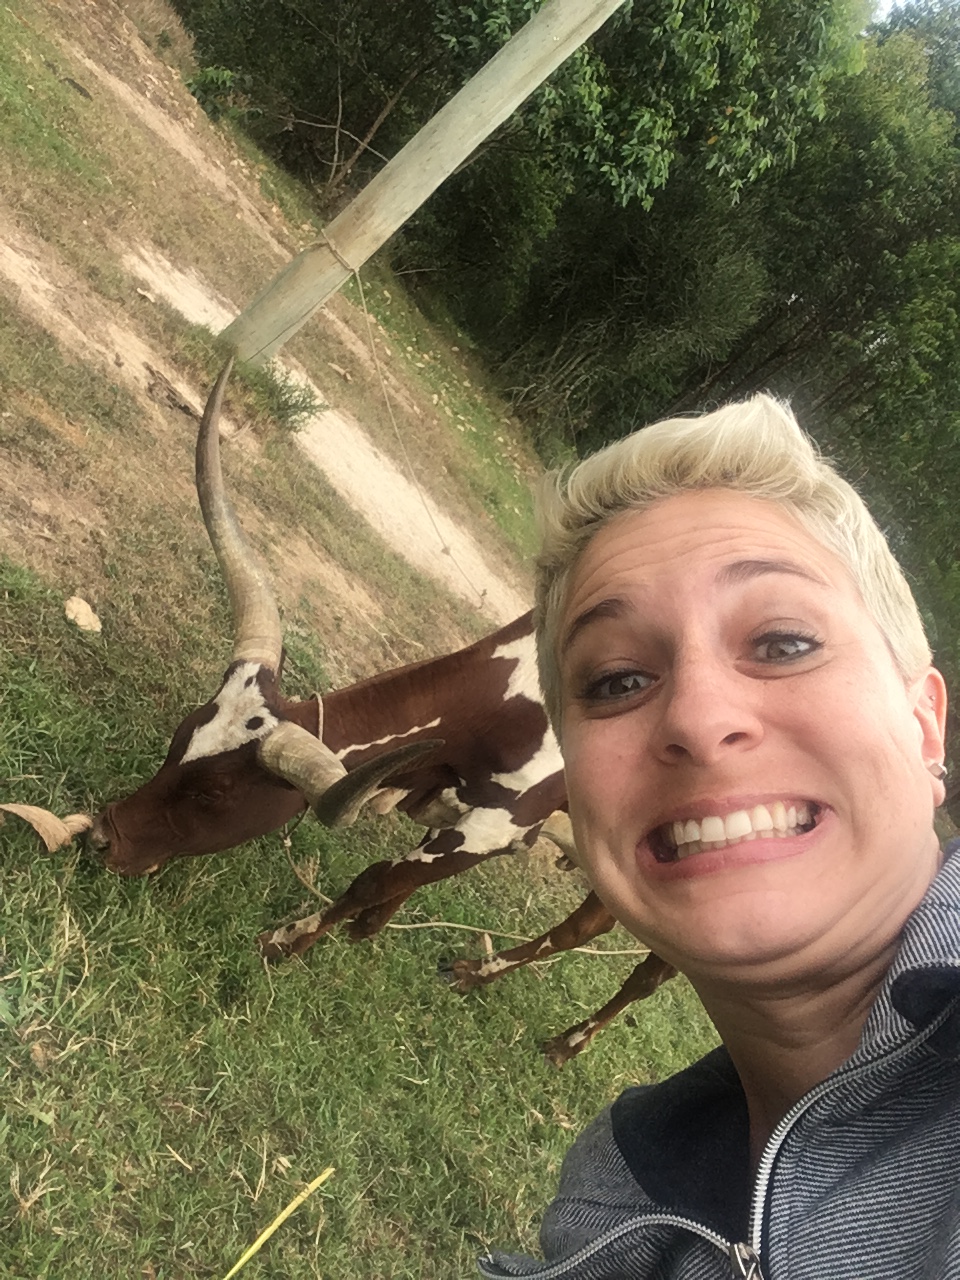 Africa - just me and a cow